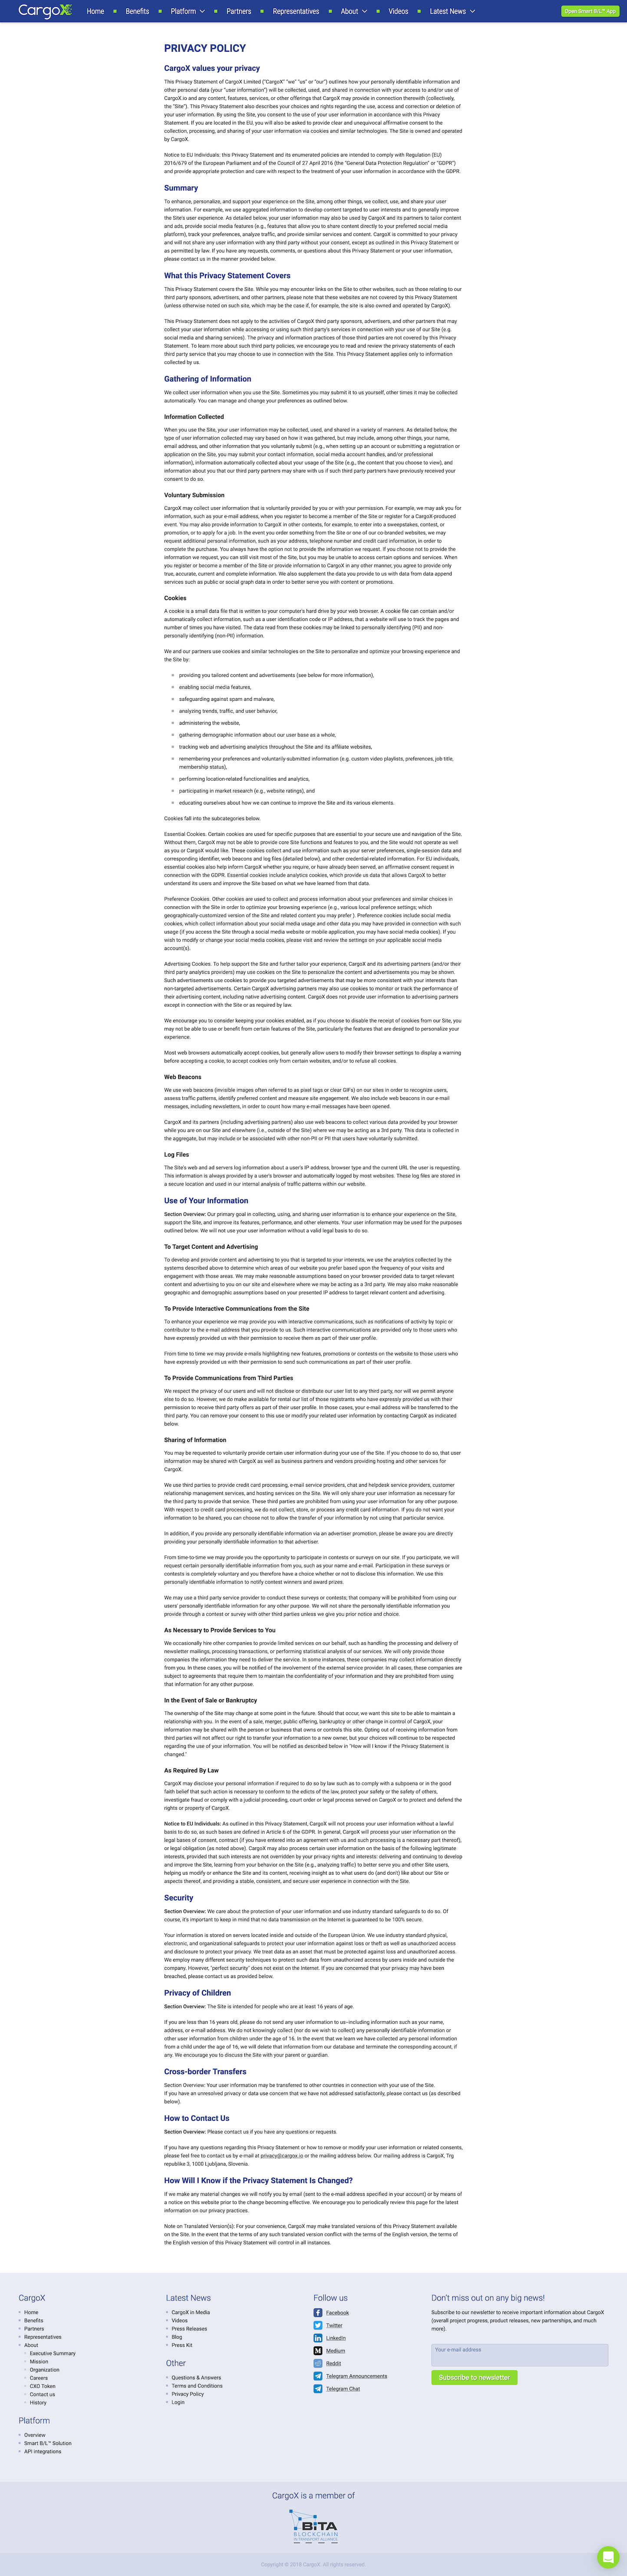 Screenshot of the Privacy Policy page from the CargoX website.